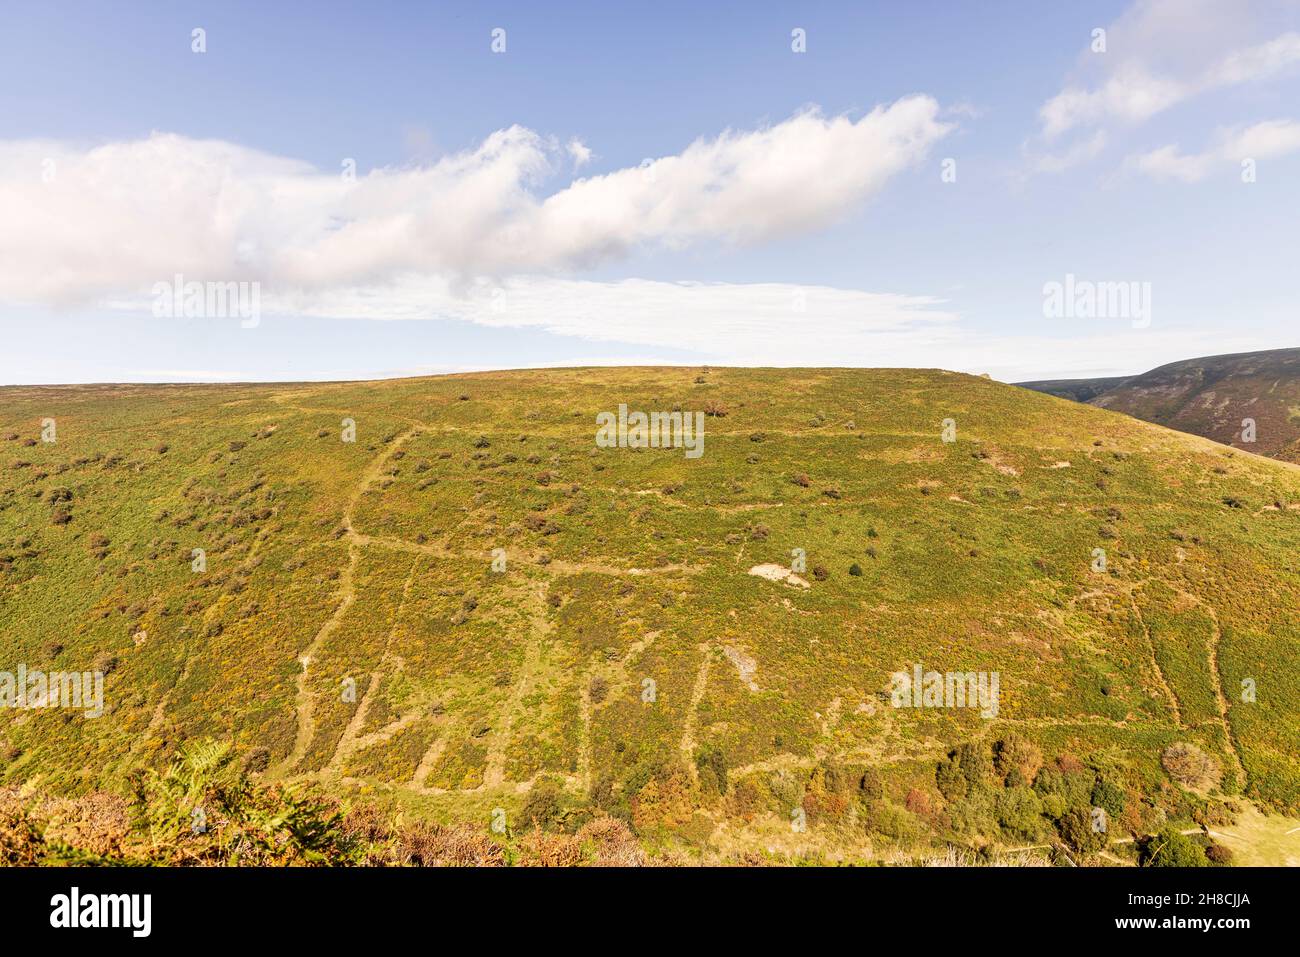 Footpaths on the steep hillsides of Carding Mill Valley, Long Mynd, Shropshire Hills, England Area of Natural Beauty, Stock Photo